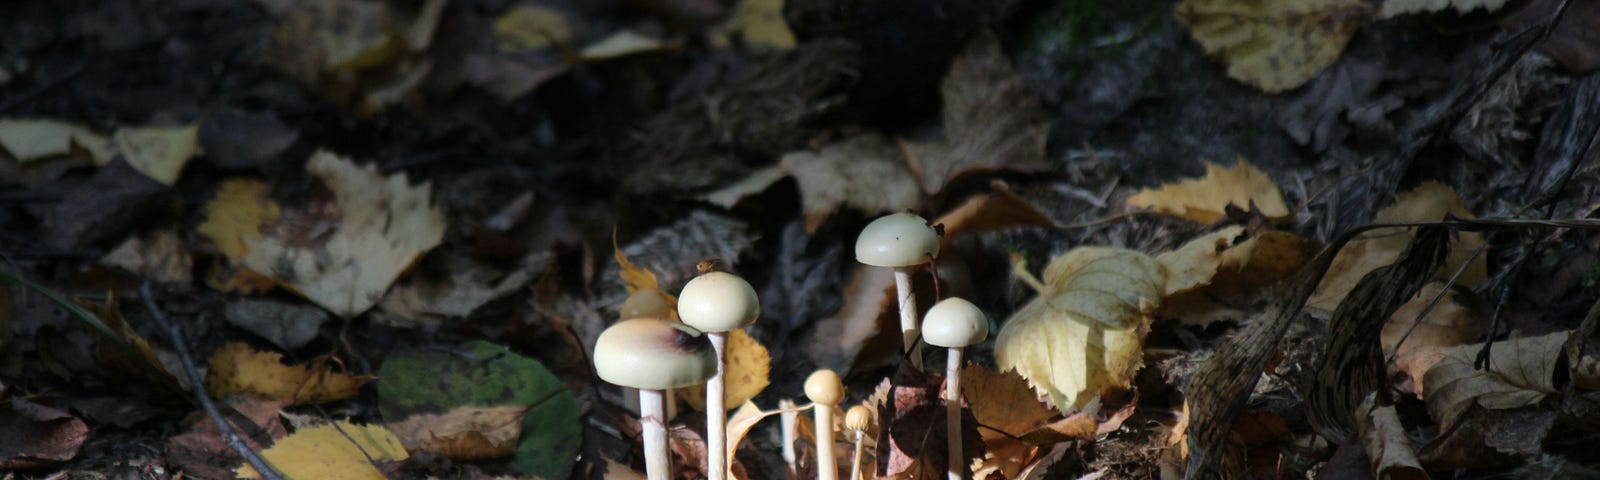 Little mushrooms growing on a forest floor